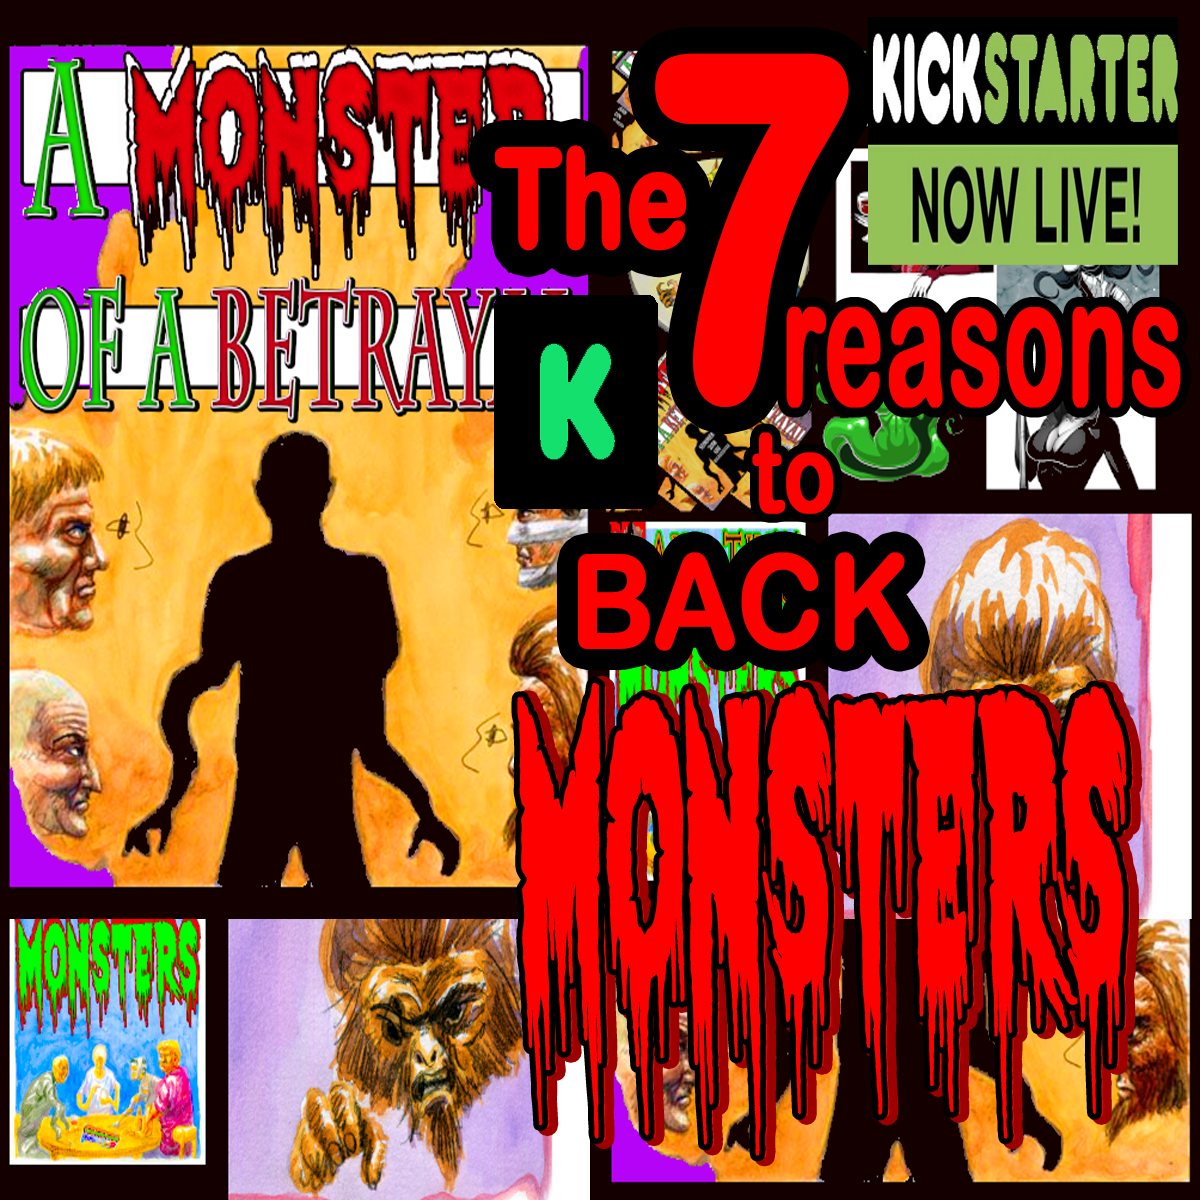 The 7 REASONS to BACK THIS  MONSTERS  of a KICKSTARTER answered LIVE